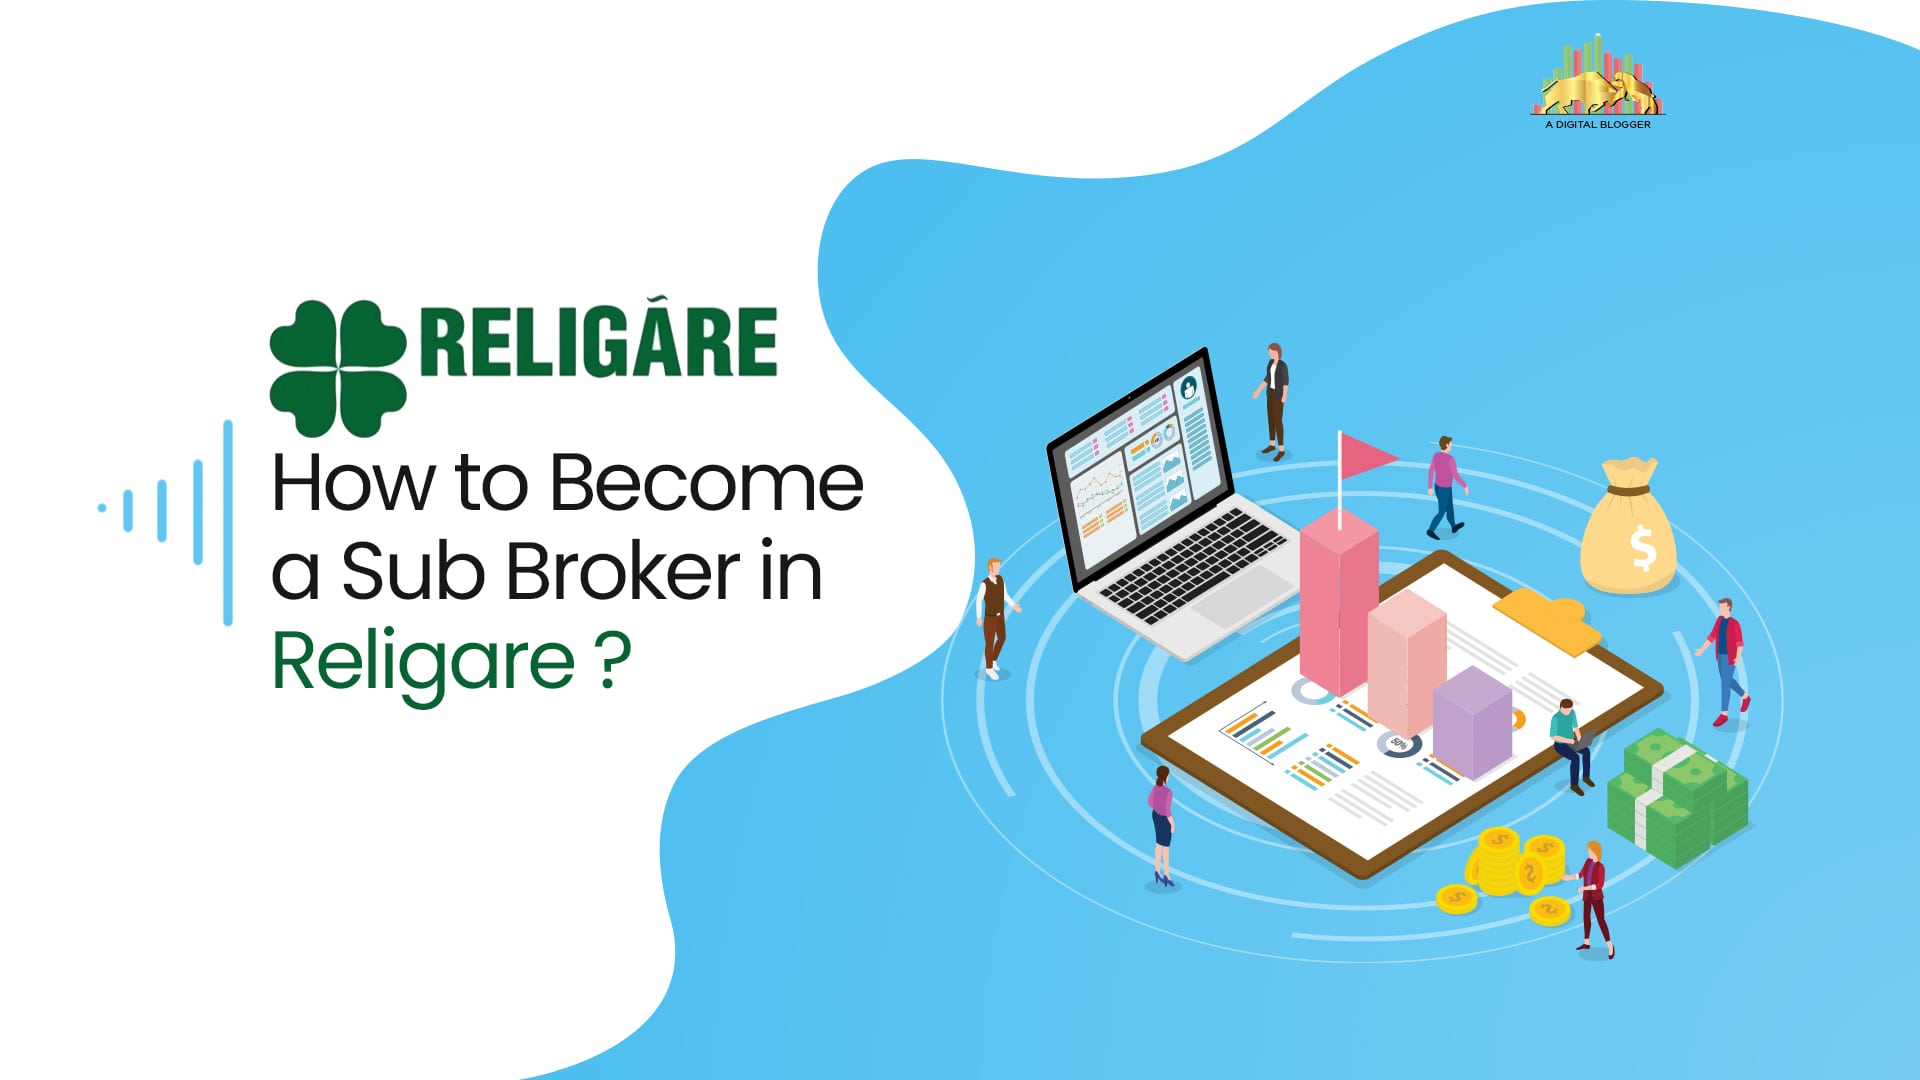 How to Become a Sub Broker in Religare